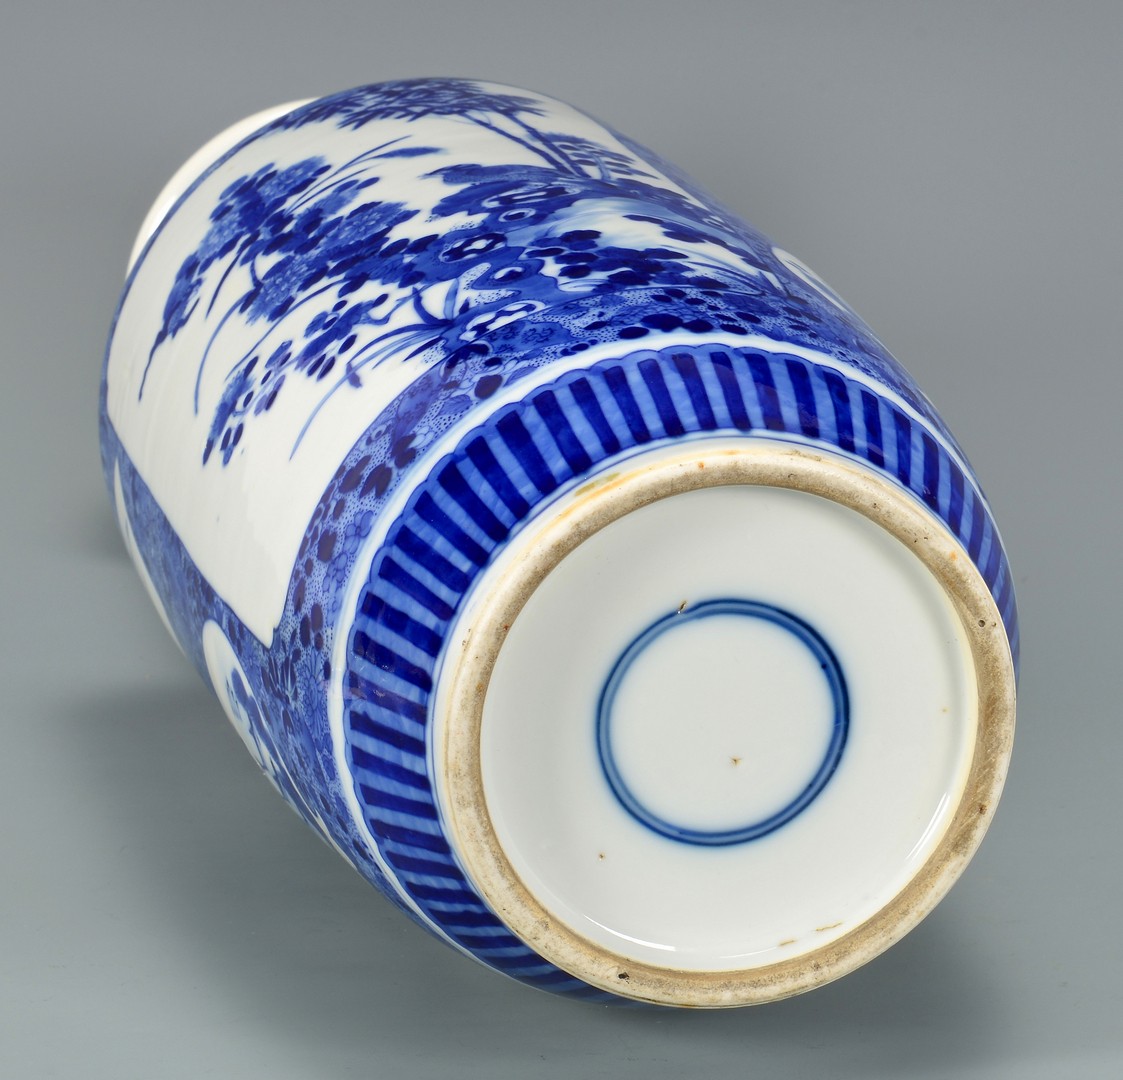 Lot 26: Chinese Blue & White Rouleau Vase